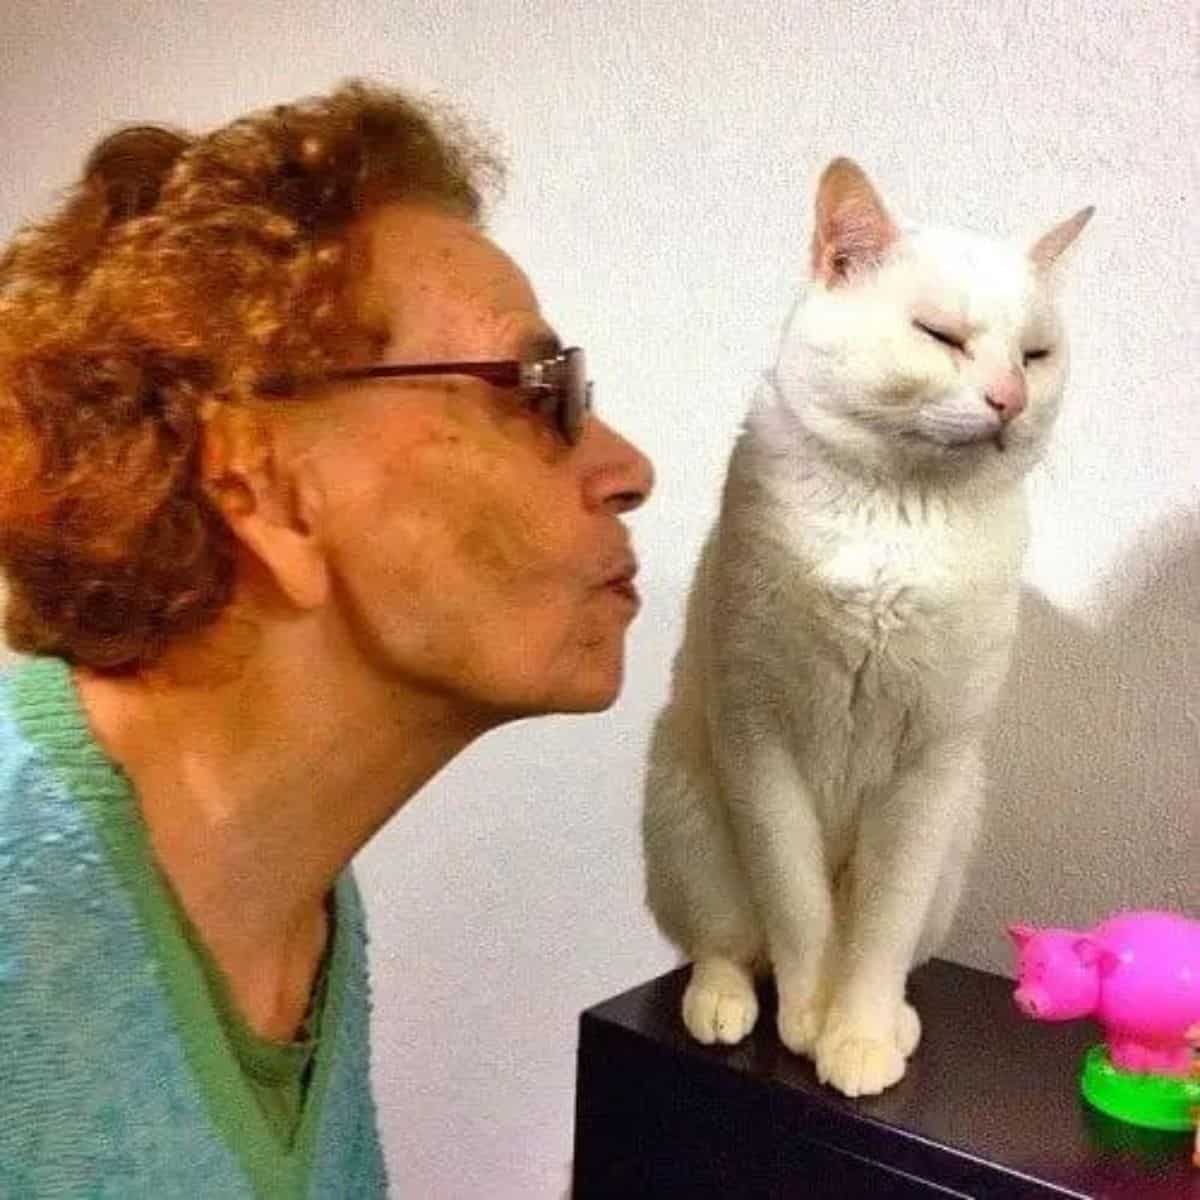 the grandmother approaches the cat to kiss it